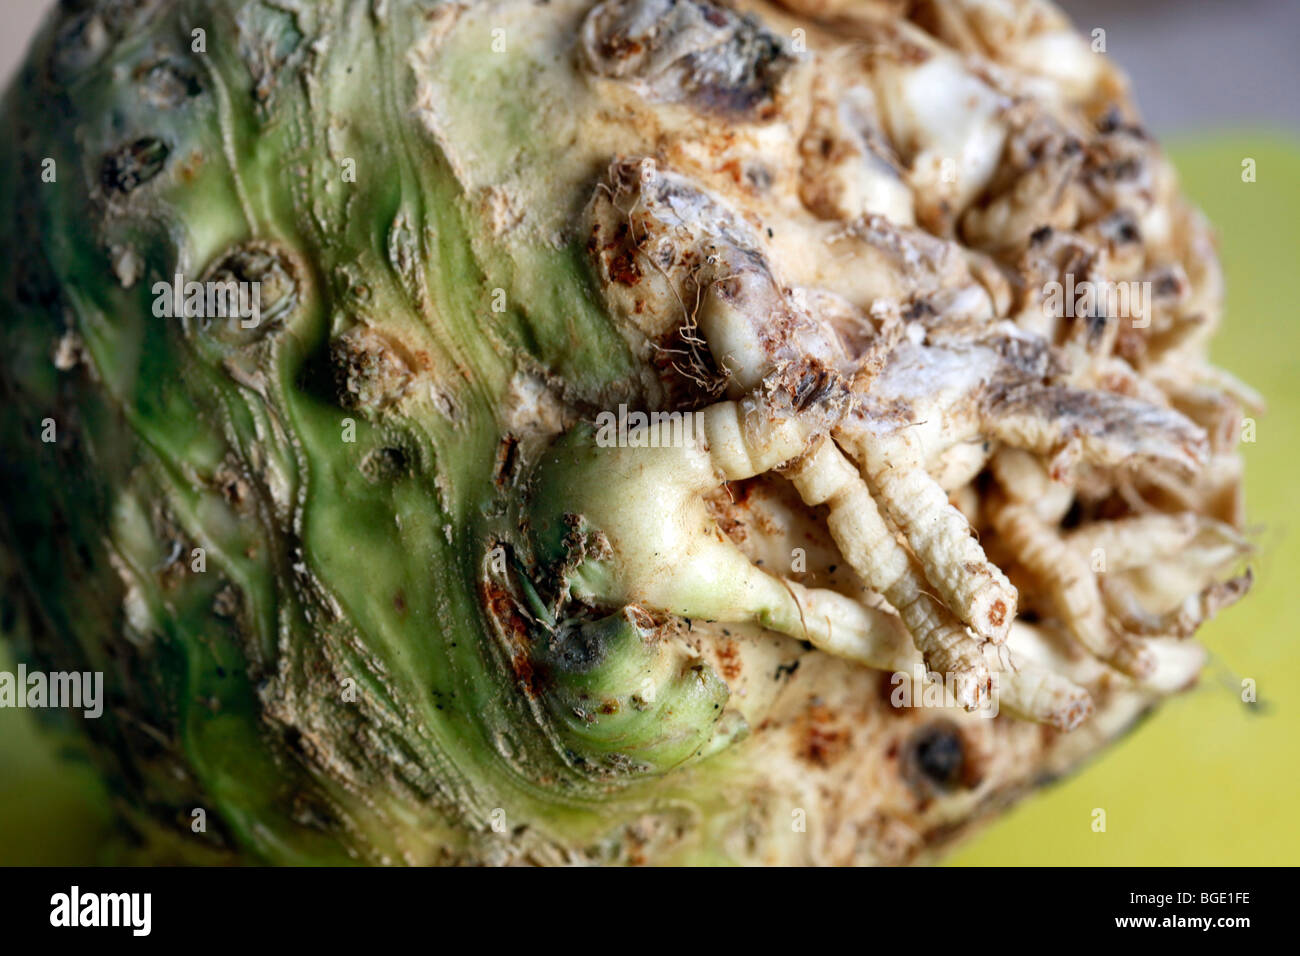 knob celery with a cut root, cooking Stock Photo